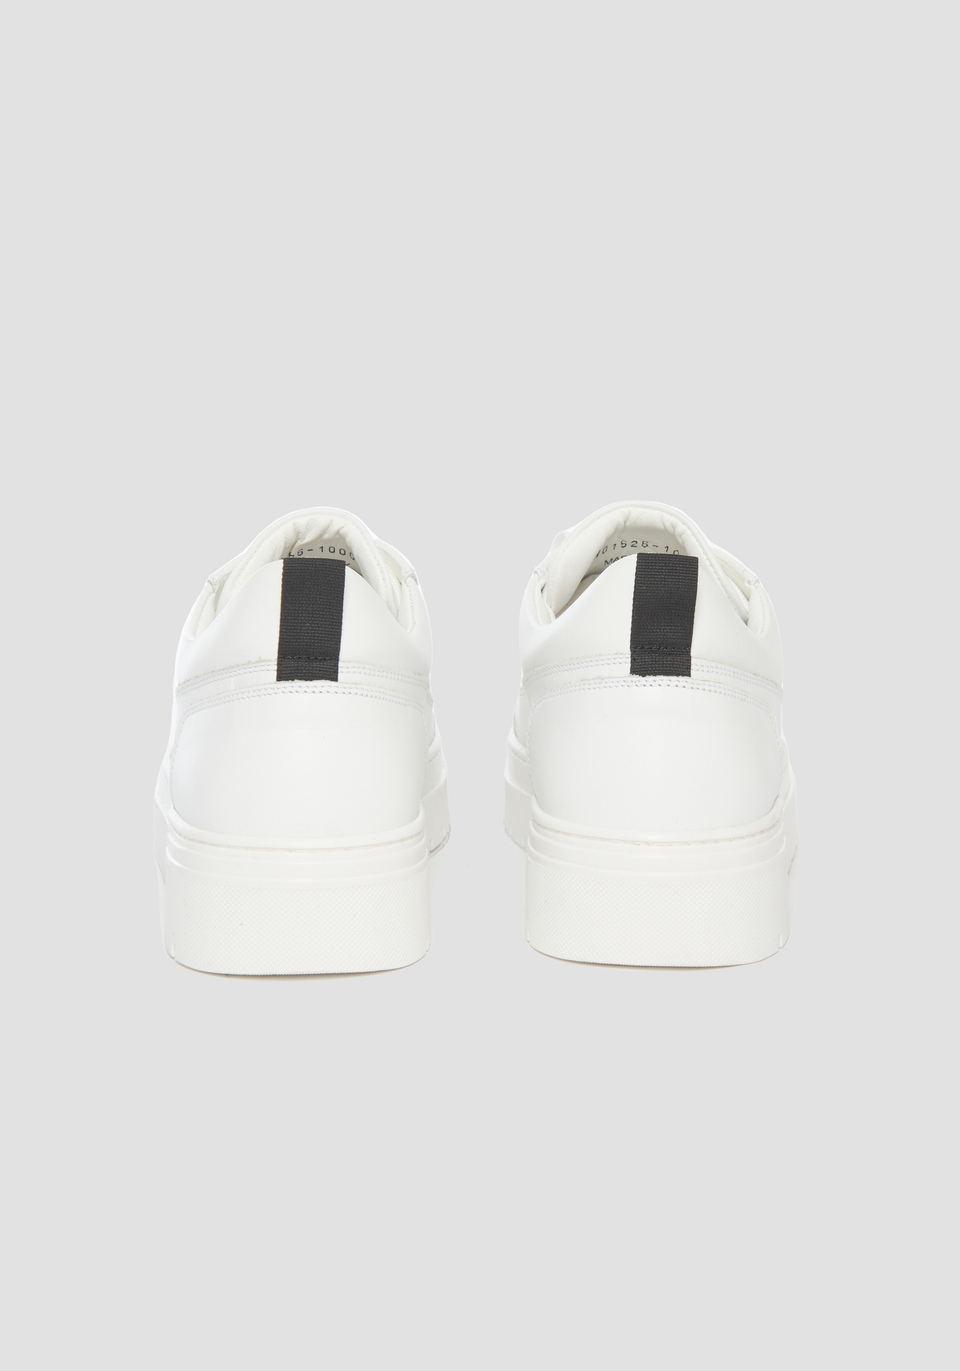 "FLINT" SNEAKERS IN LEATHER WITH TONE-ON-TONE DETAILS - Antony Morato Online Shop